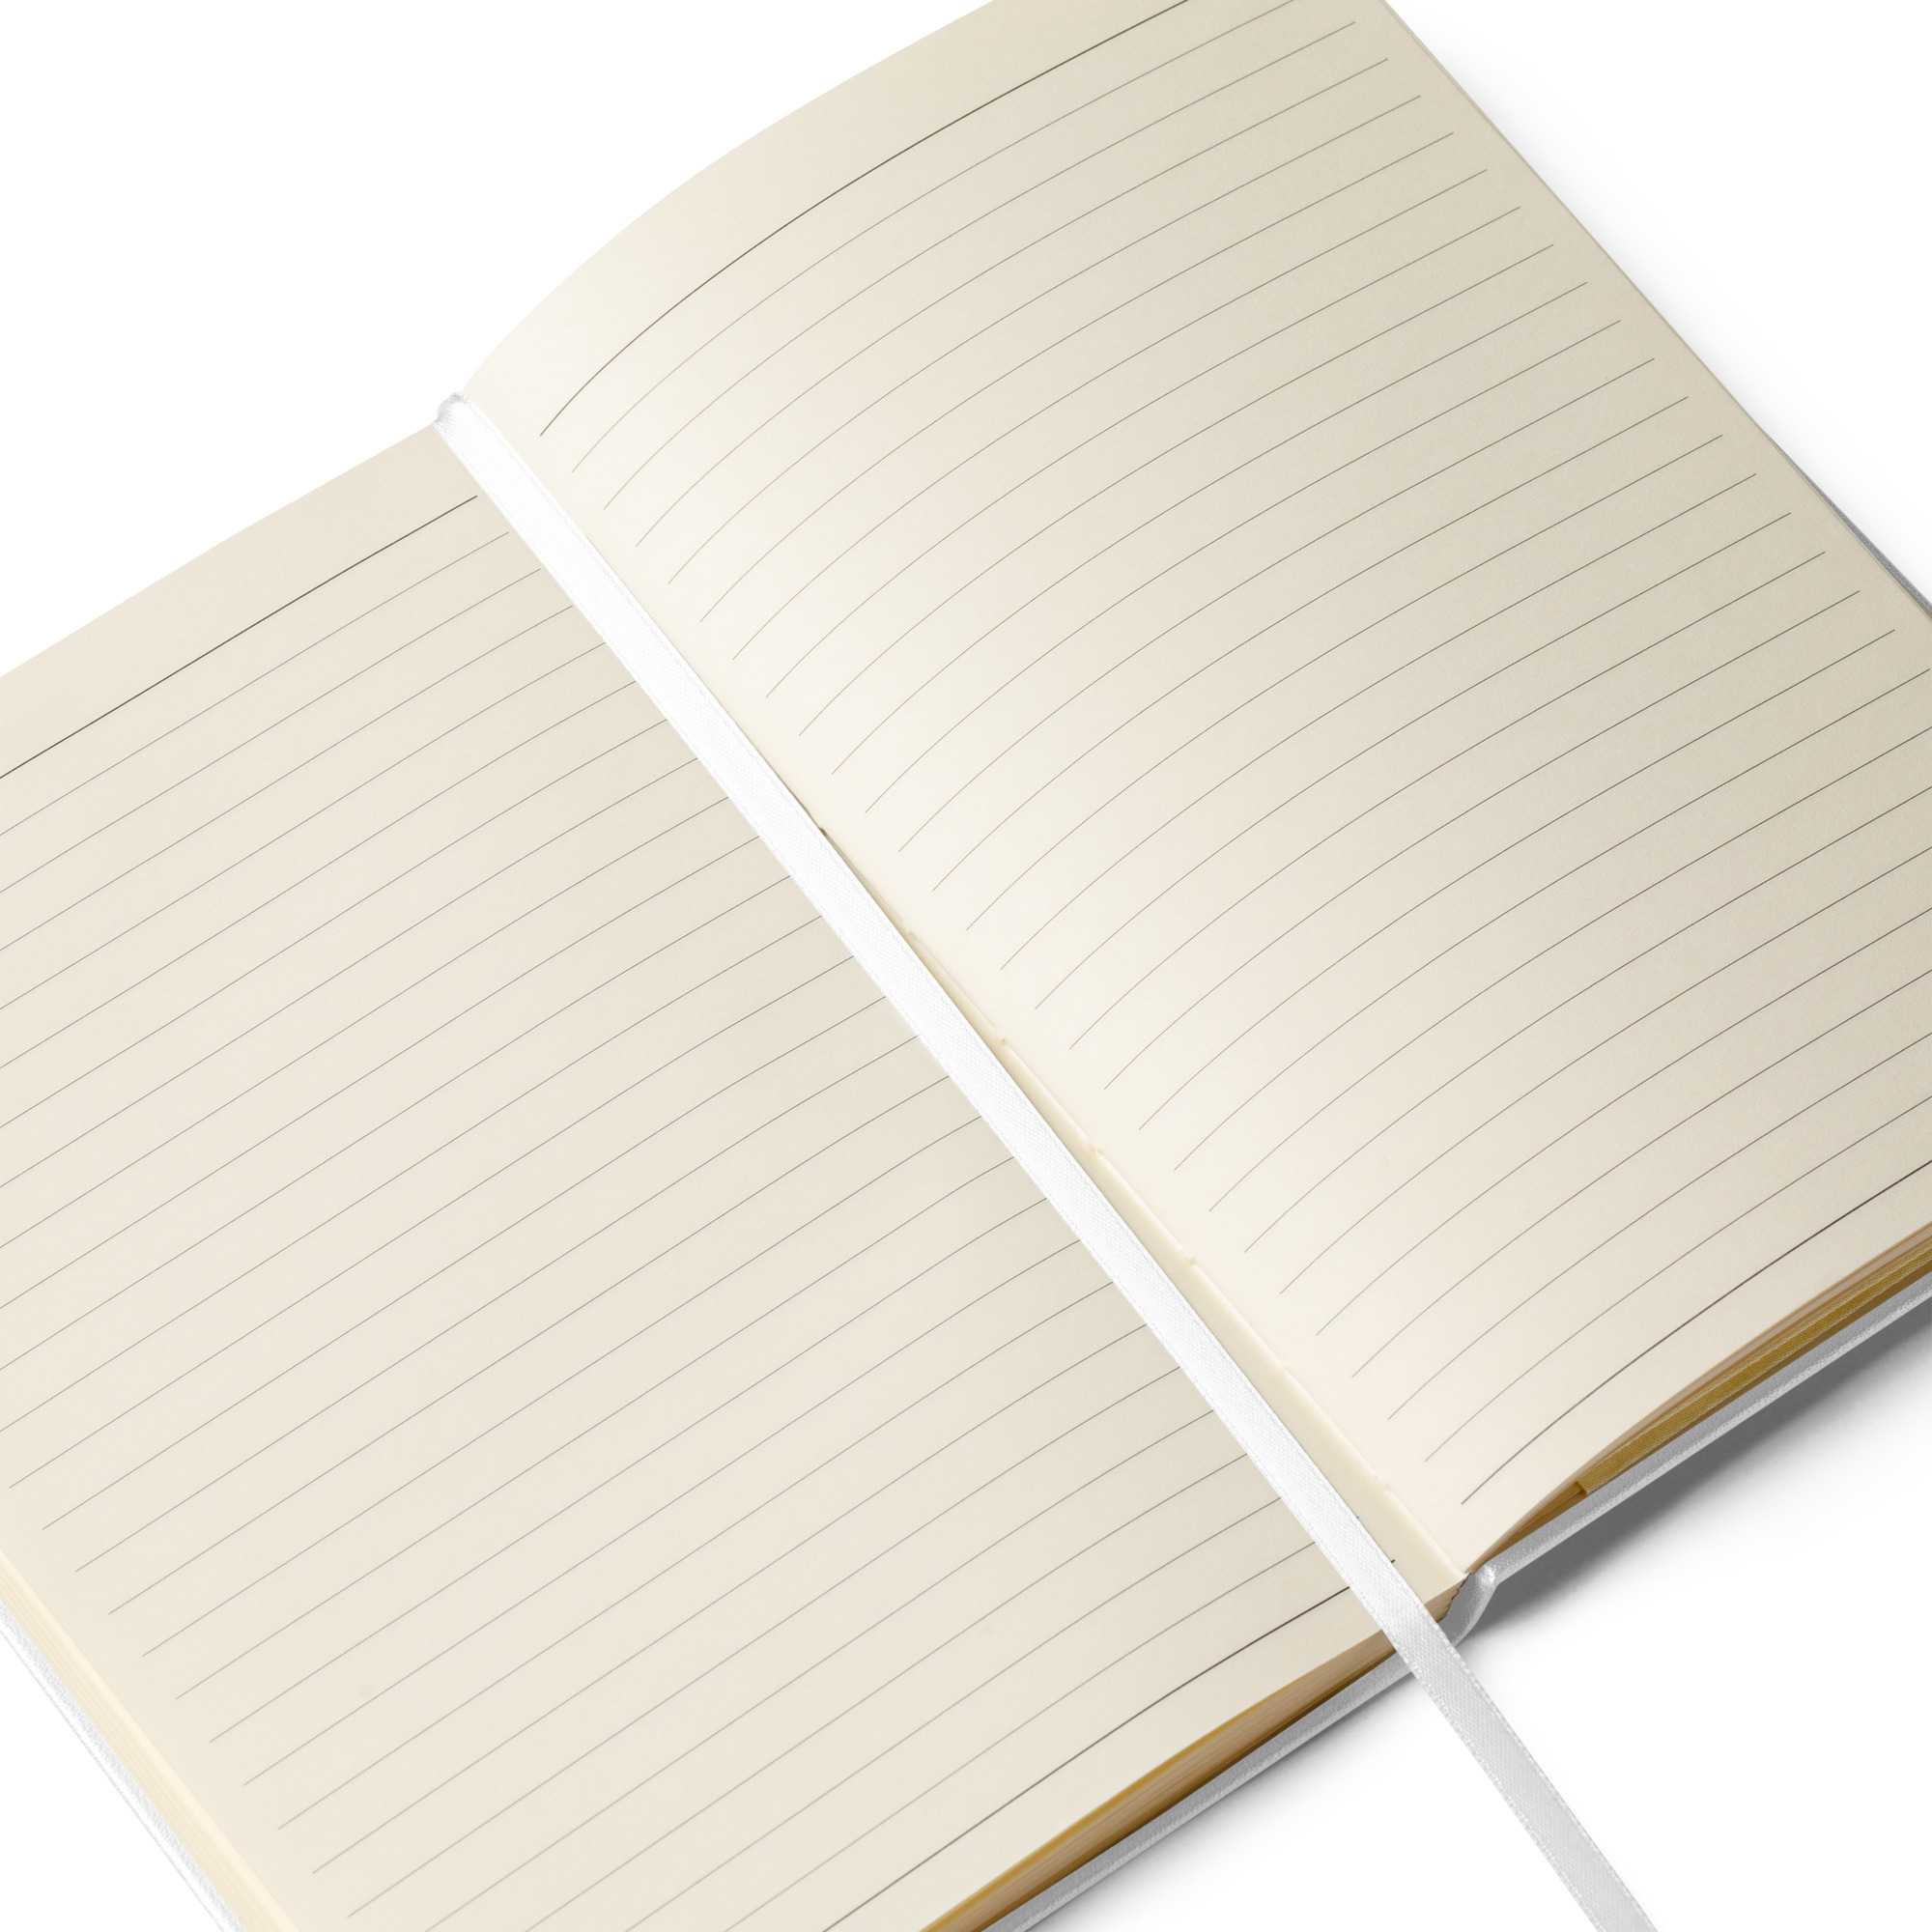 hardcover-bound-notebook-white-product-details-2-6537e62ae2c8a.jpg